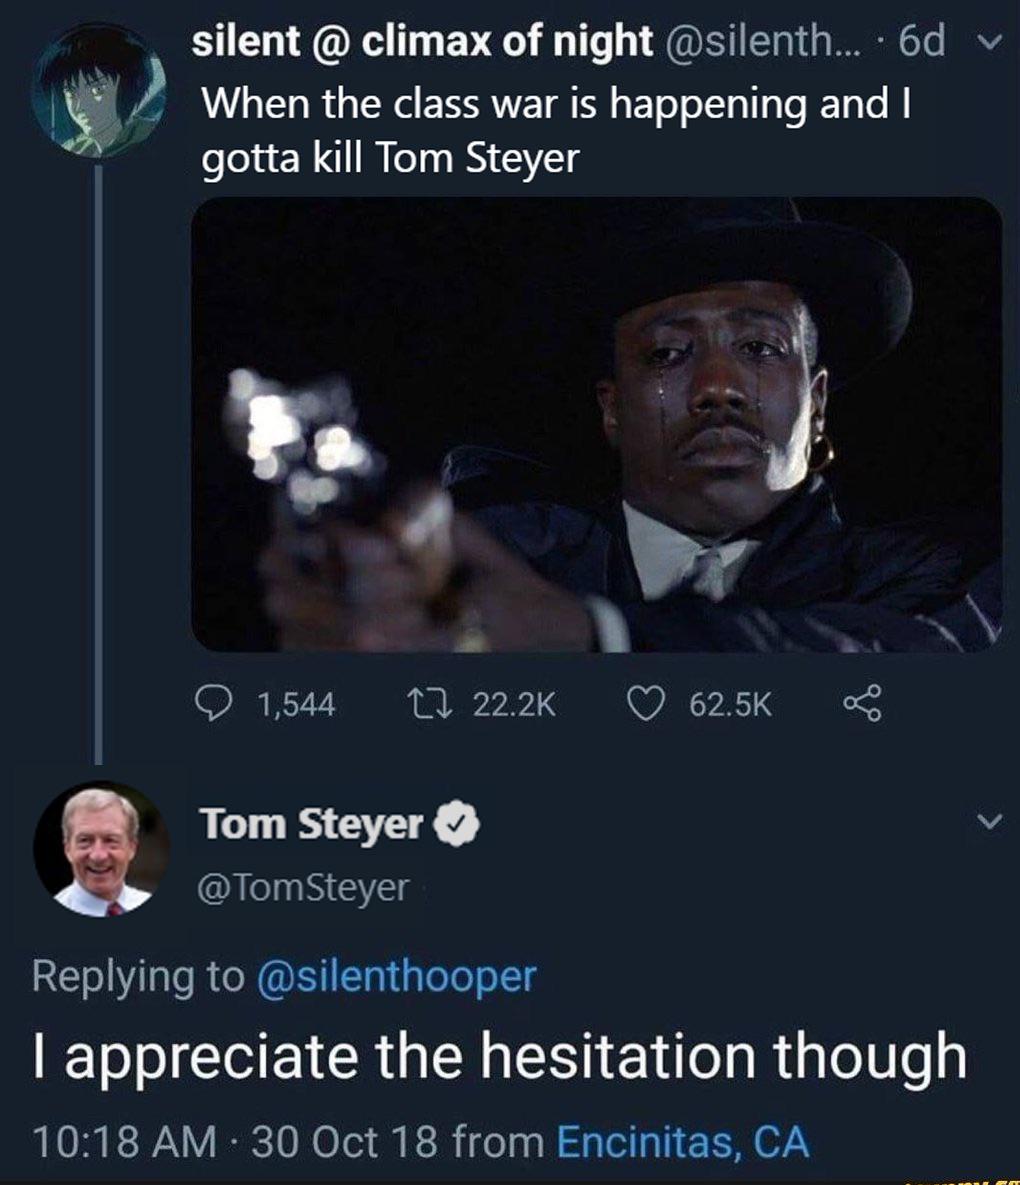 buzzfeed unsolved memes - silent @ climax of night .... 60 v When the class war is happening and I gotta kill Tom Steyer 1,544 27 8 Tom Steyer Tappreciate the hesitation though 30 Oct 18 from Encinitas, Ca